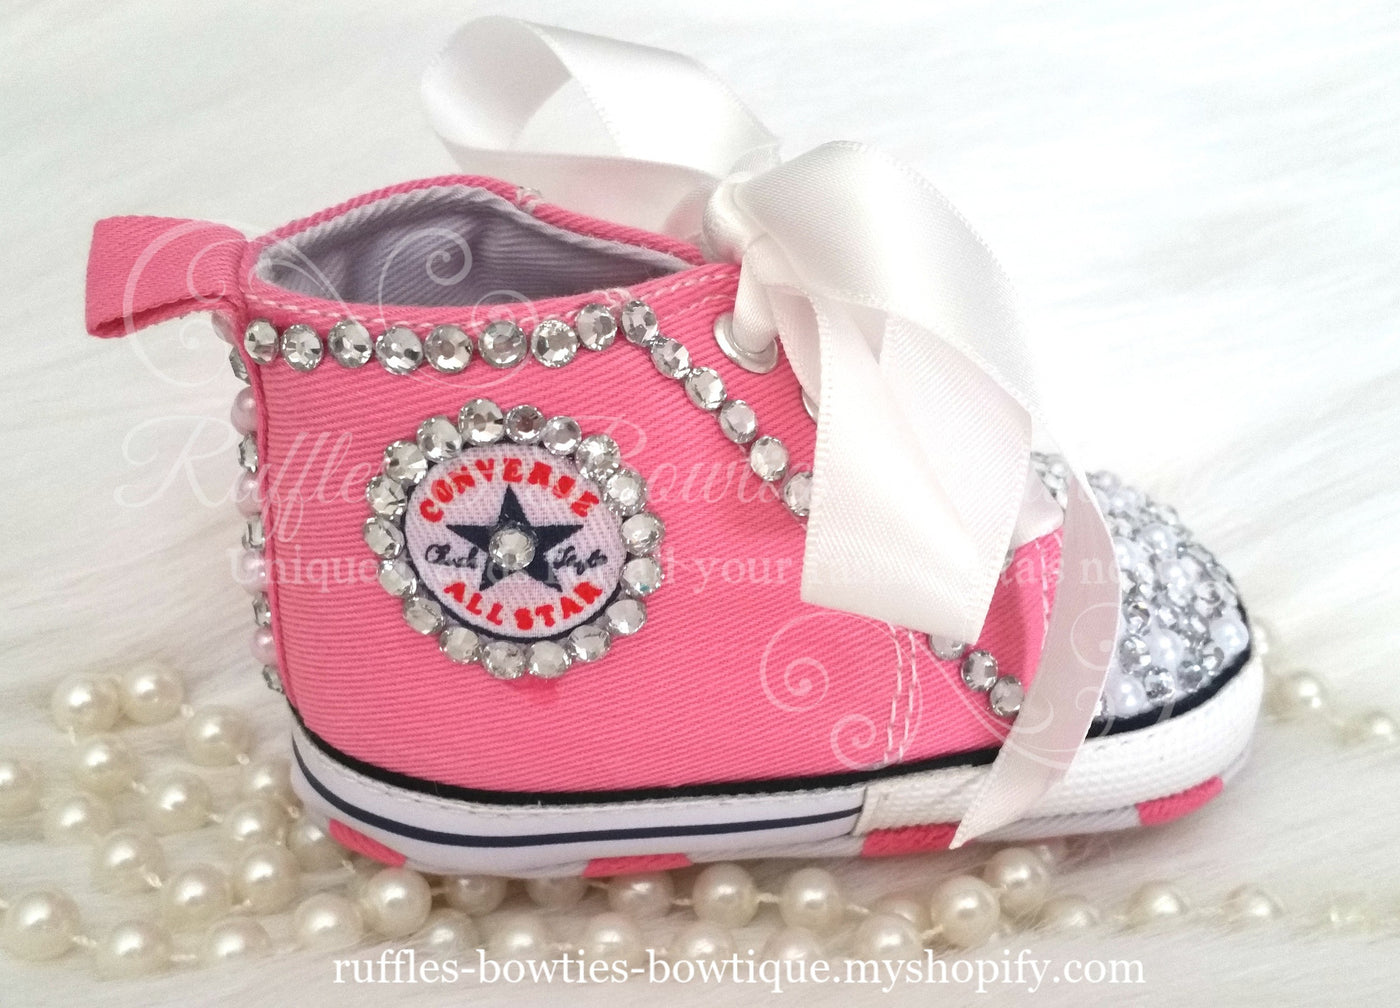 Crystal & Pearl Converse High Tops - Crystal Shoes - Pre Walker Shoes - Baby Girl Shoes - Wedding - Christening - Baptism - Baby - Hot Pink | Ruffles & Bowtique